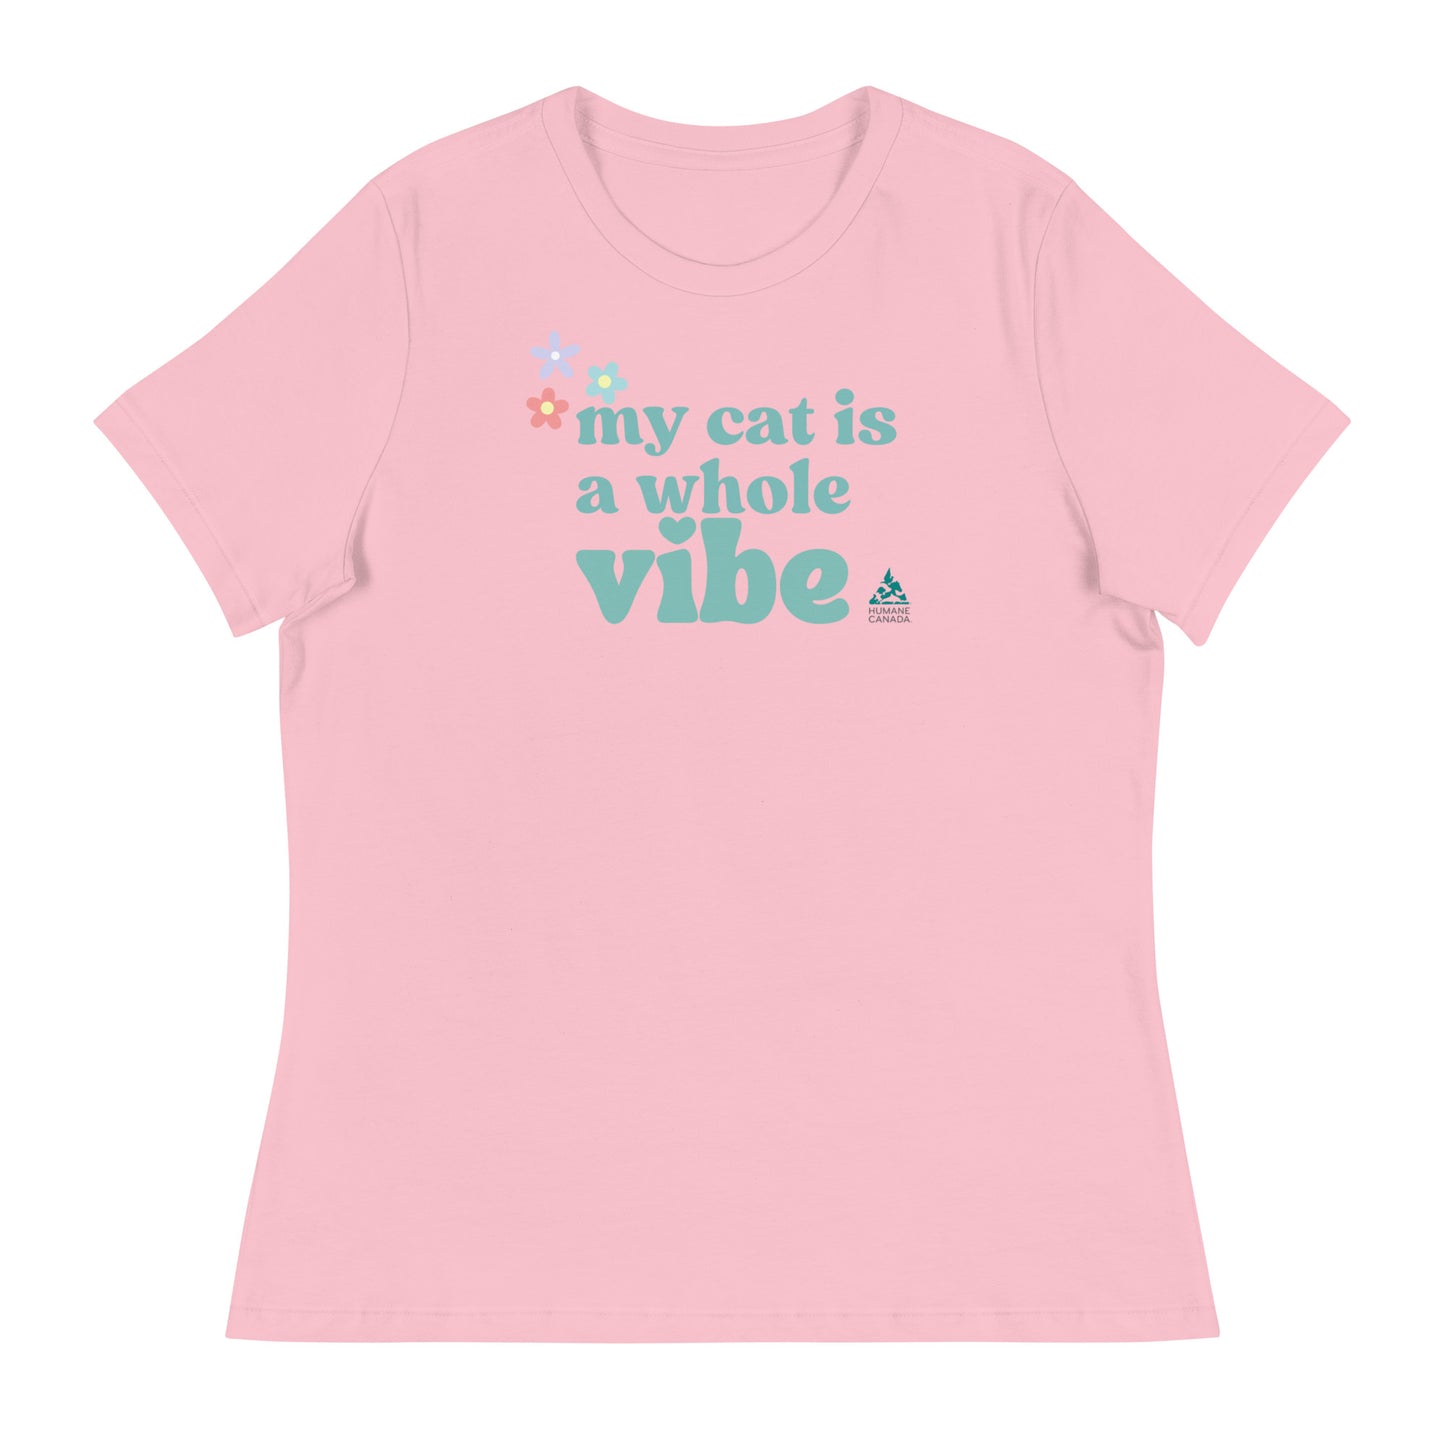 My Cat Is A Vibe - Women's Relaxed T-Shirt